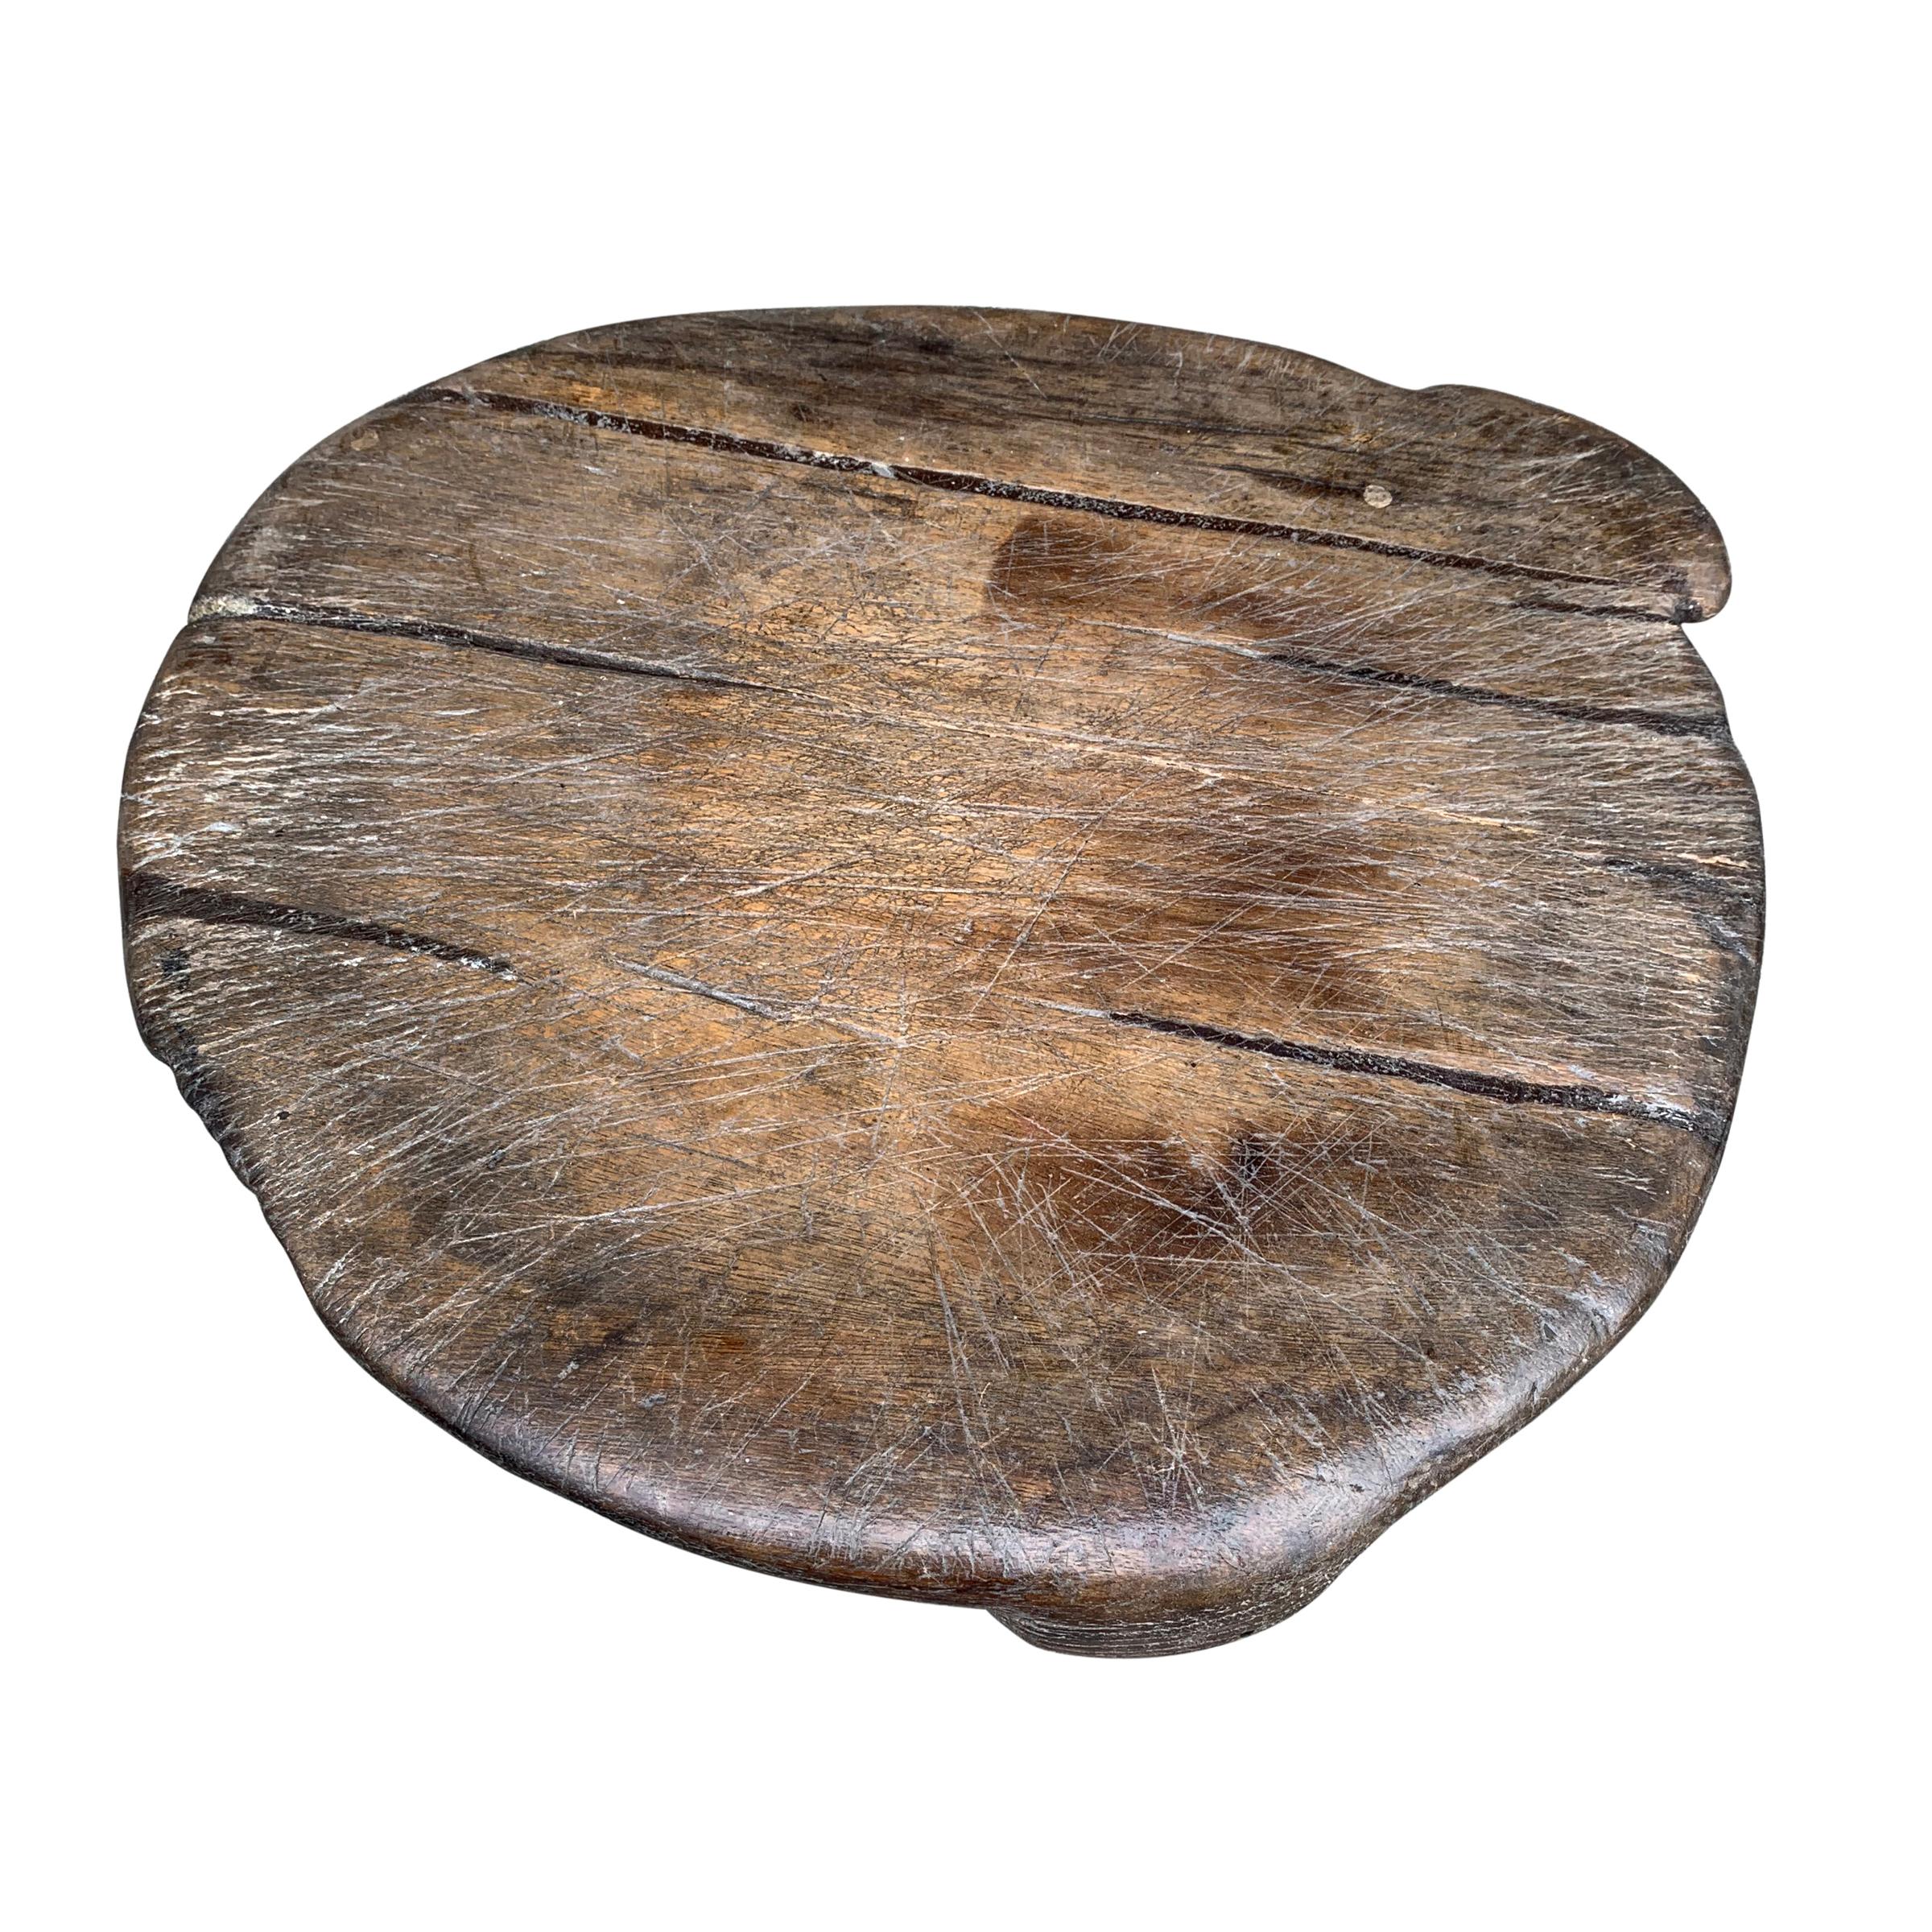 An incredible 18th century Italian wooden pot board, originally used as a trivet to place a pot just off the stove or the fire. The wear and patina are beautiful! It is the perfect elevated platform for serving cheese, charcuterie, or other festive